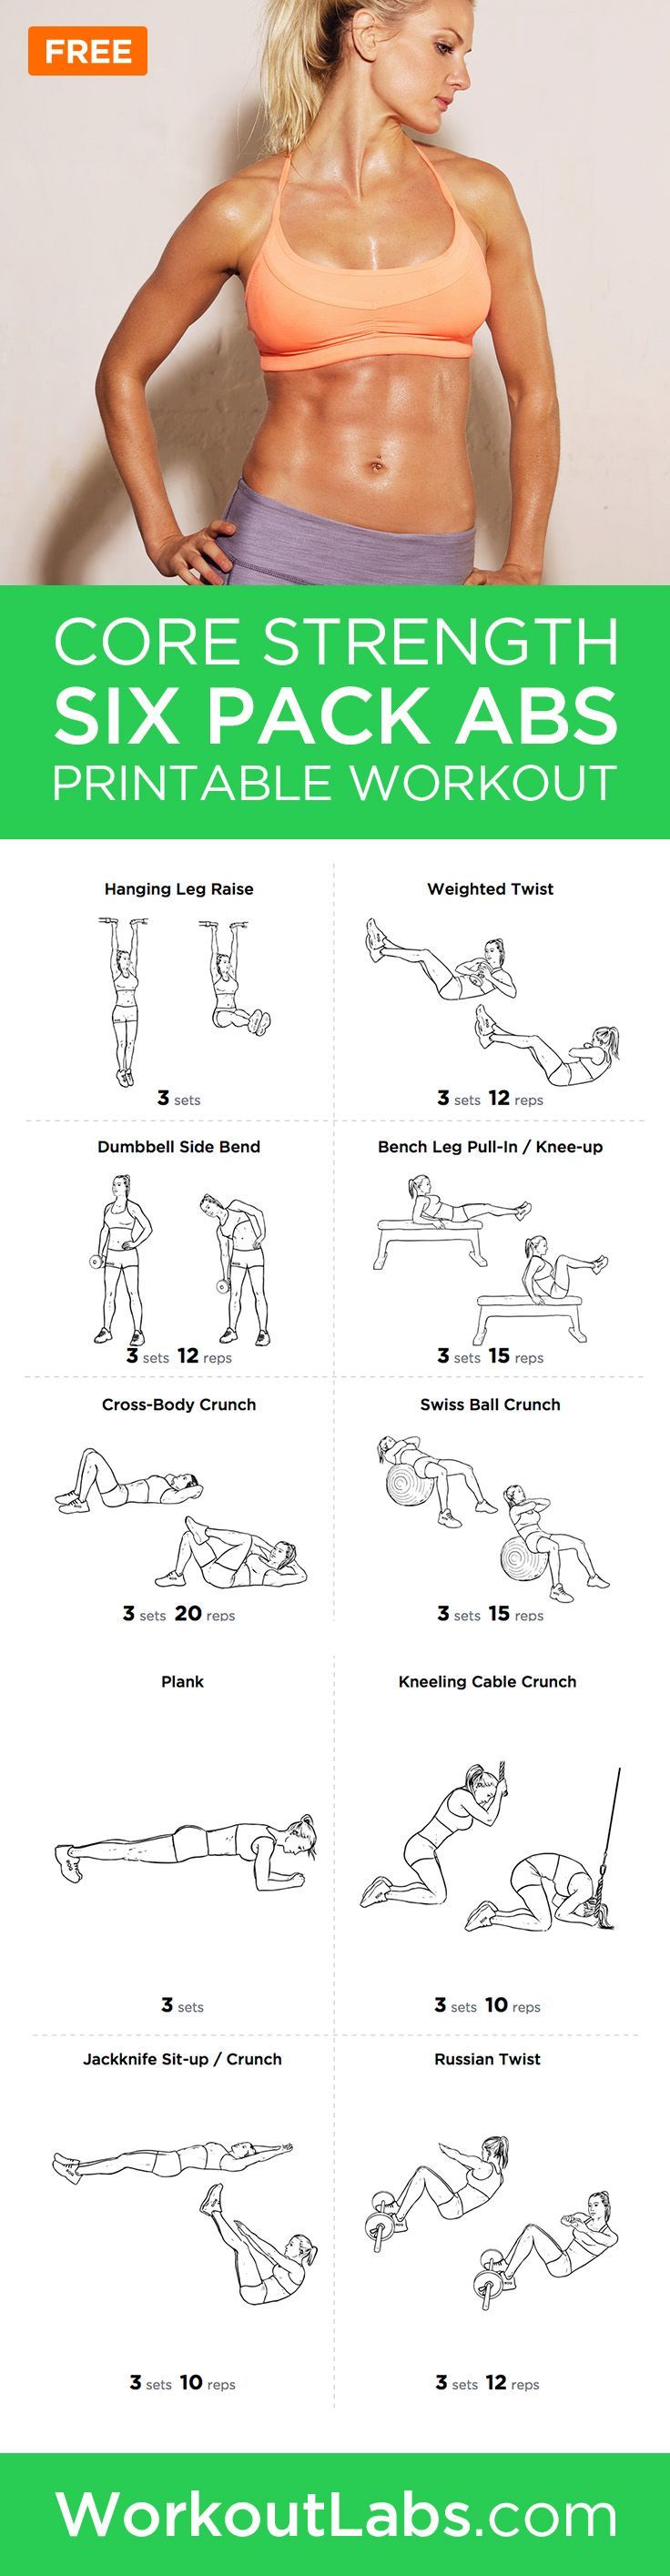 Six Pack Abs Core Strength Workout Routine for Men and Women – Want to get that perfect six pack? Try this comprehensive abdominal gym workout routine that will hit your upper and lower abs as well